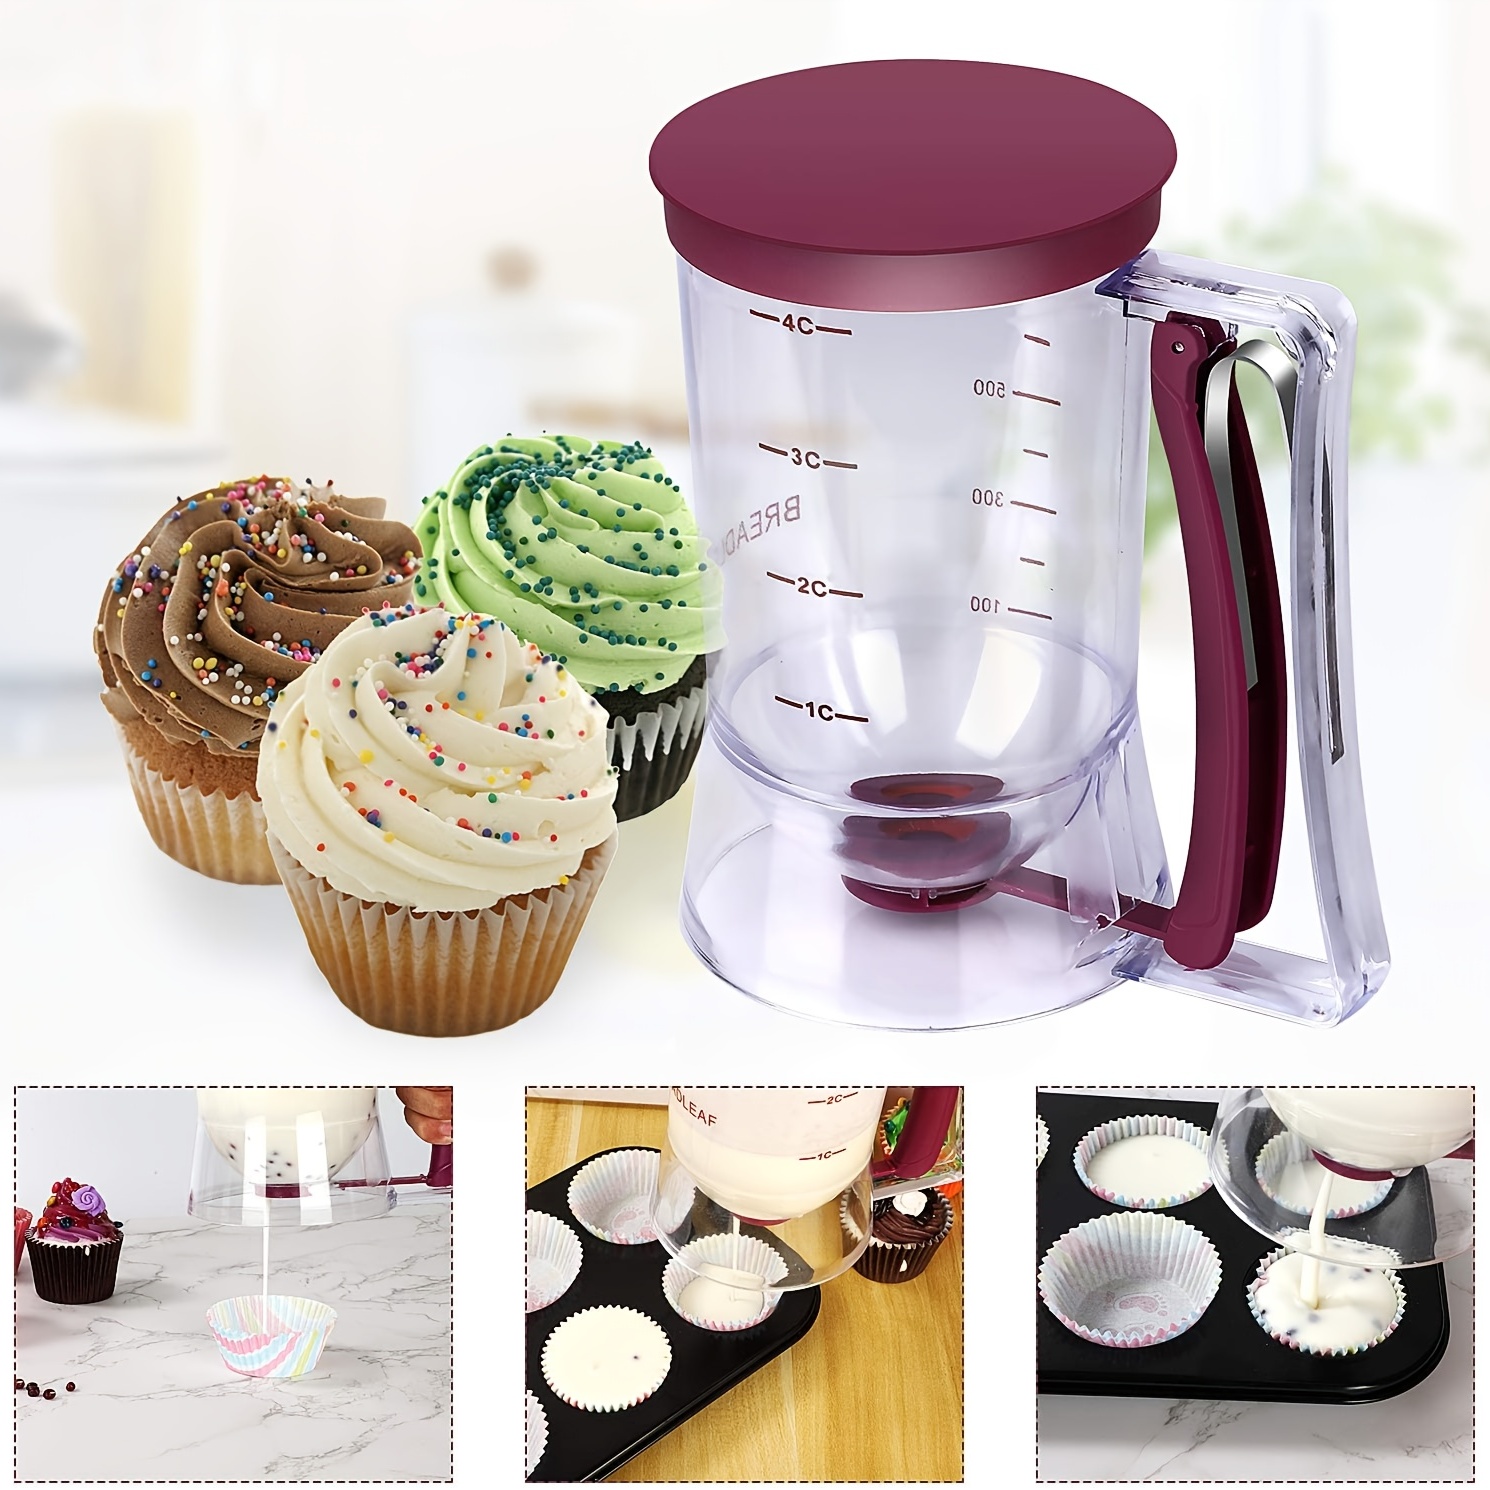 Multipurpose Practical And Versatile Applicator For Cake And Cupcakes